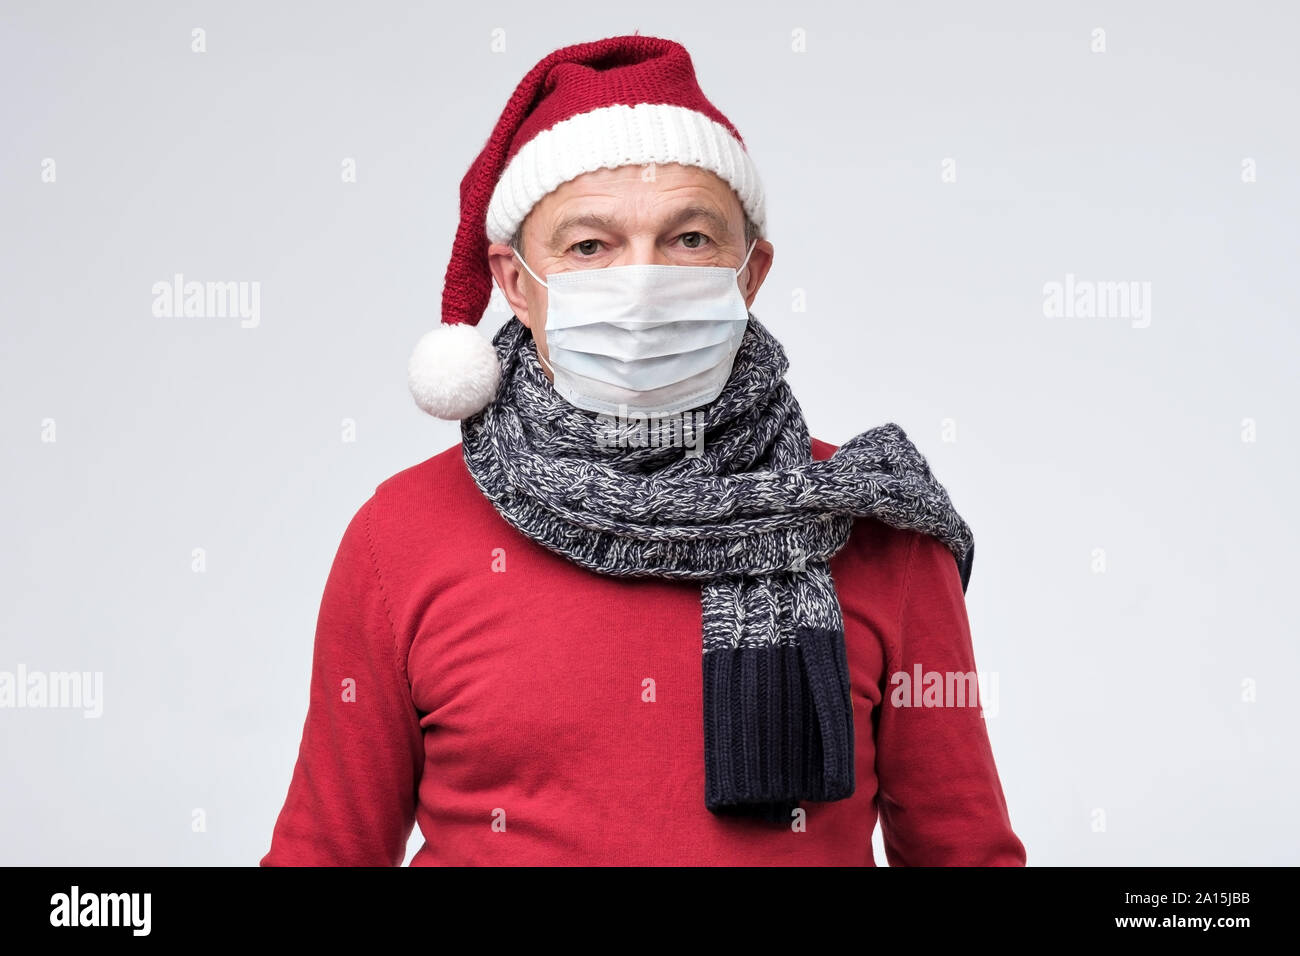 Caucasian mature man in red santa claus christmas hat closing face with medical mask protecting from virus. Studio shot Stock Photo